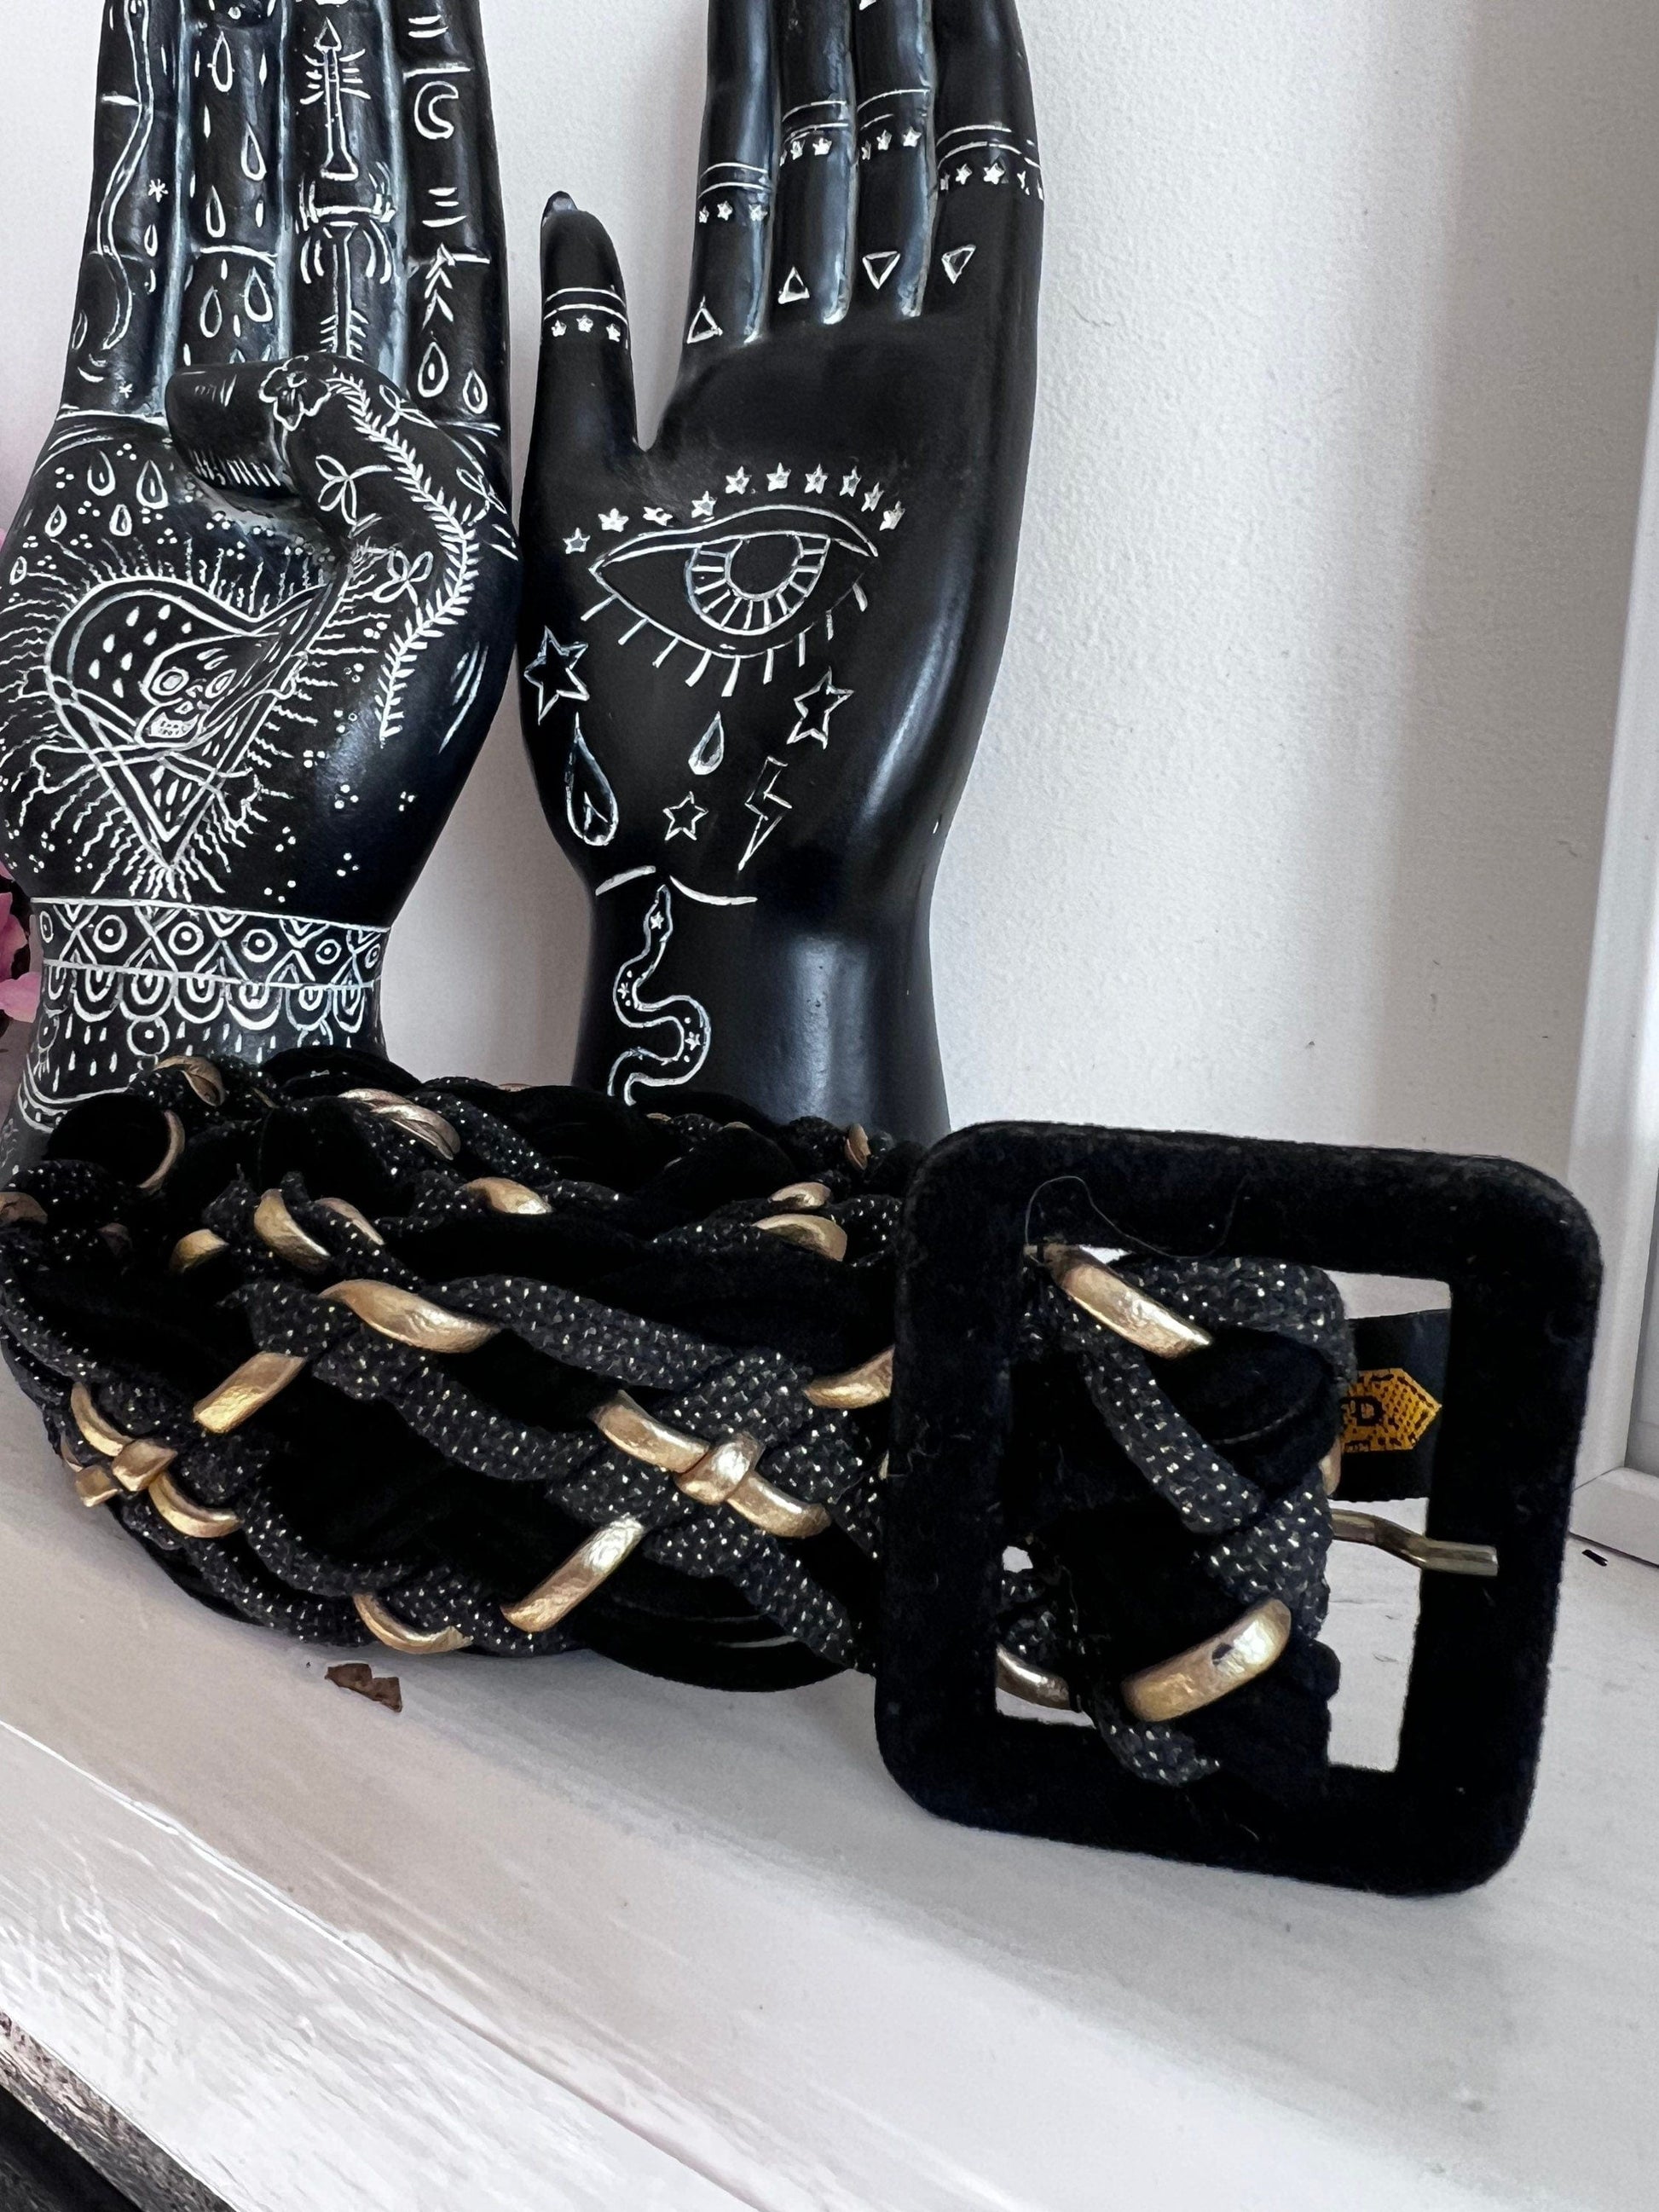 Vintage 90s Black Braided Woven wide Belt - dual Coloured Woven 1990s black and Gold 94cm 37”